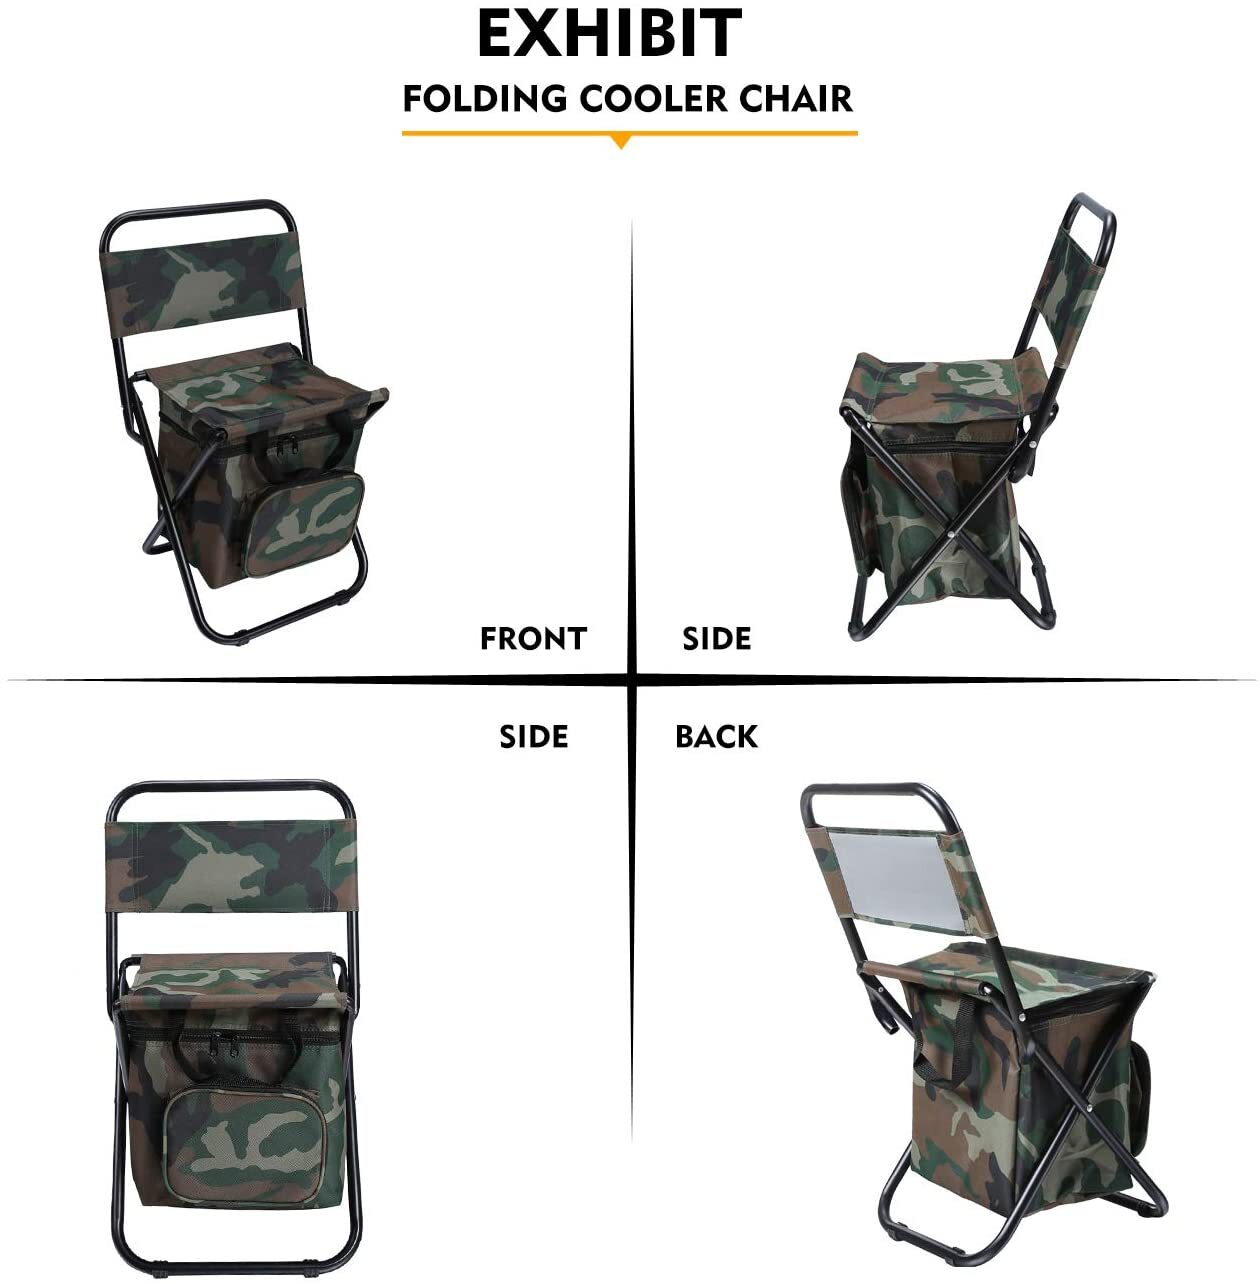 https://images.51microshop.com/5848/product/20201209/LEADALLWAY_Foldable_Camping_Chair_with_Cooler_Bag_Compact_Fishing_Stool_1607505256534_3.jpg